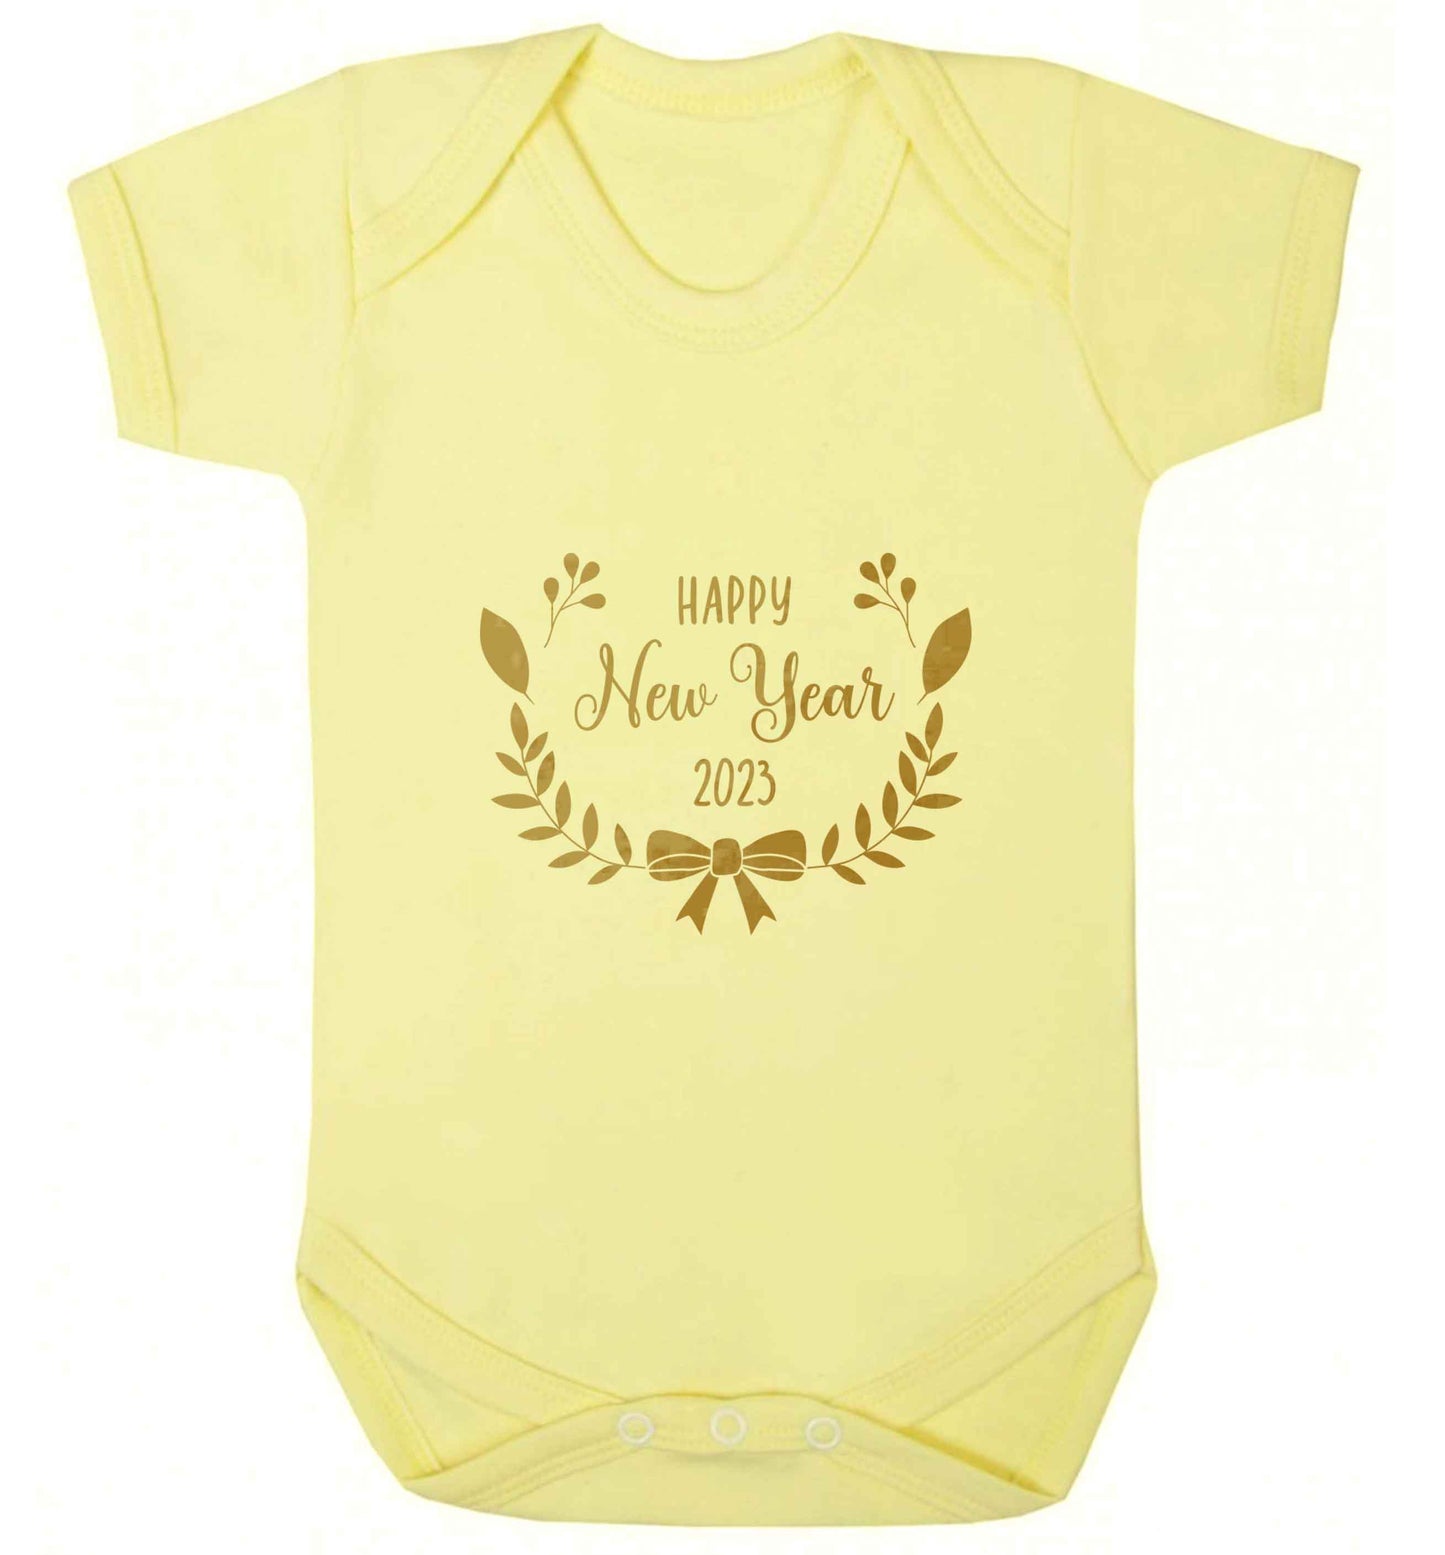 Happy New Year 2023 baby vest pale yellow 18-24 months